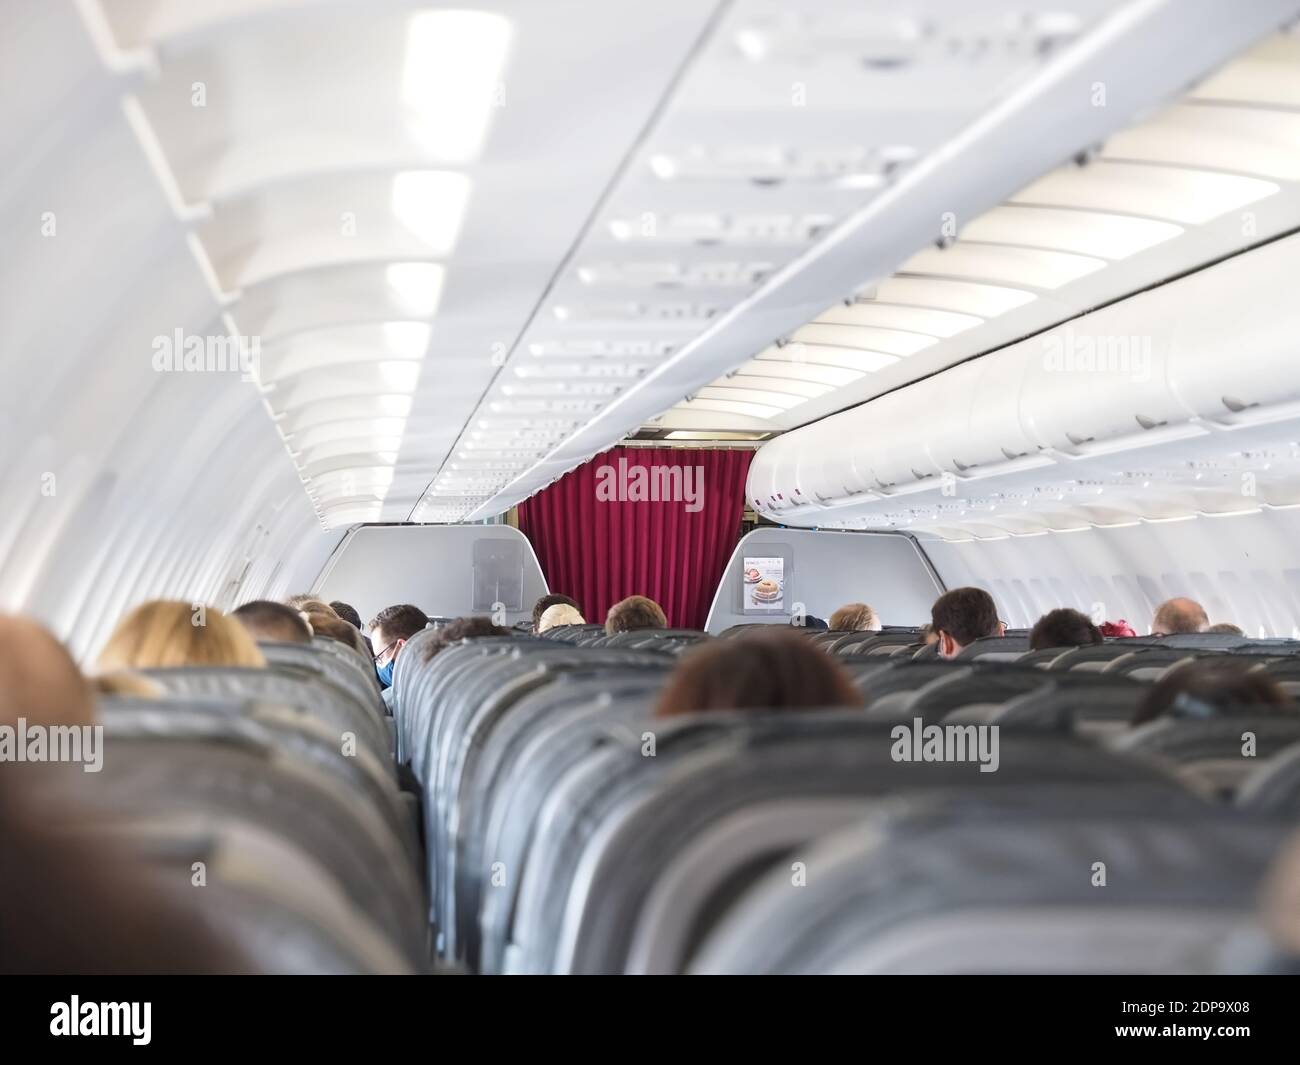 The world of aircraft - Passengers inside the cabin of an airplane Stock Photo